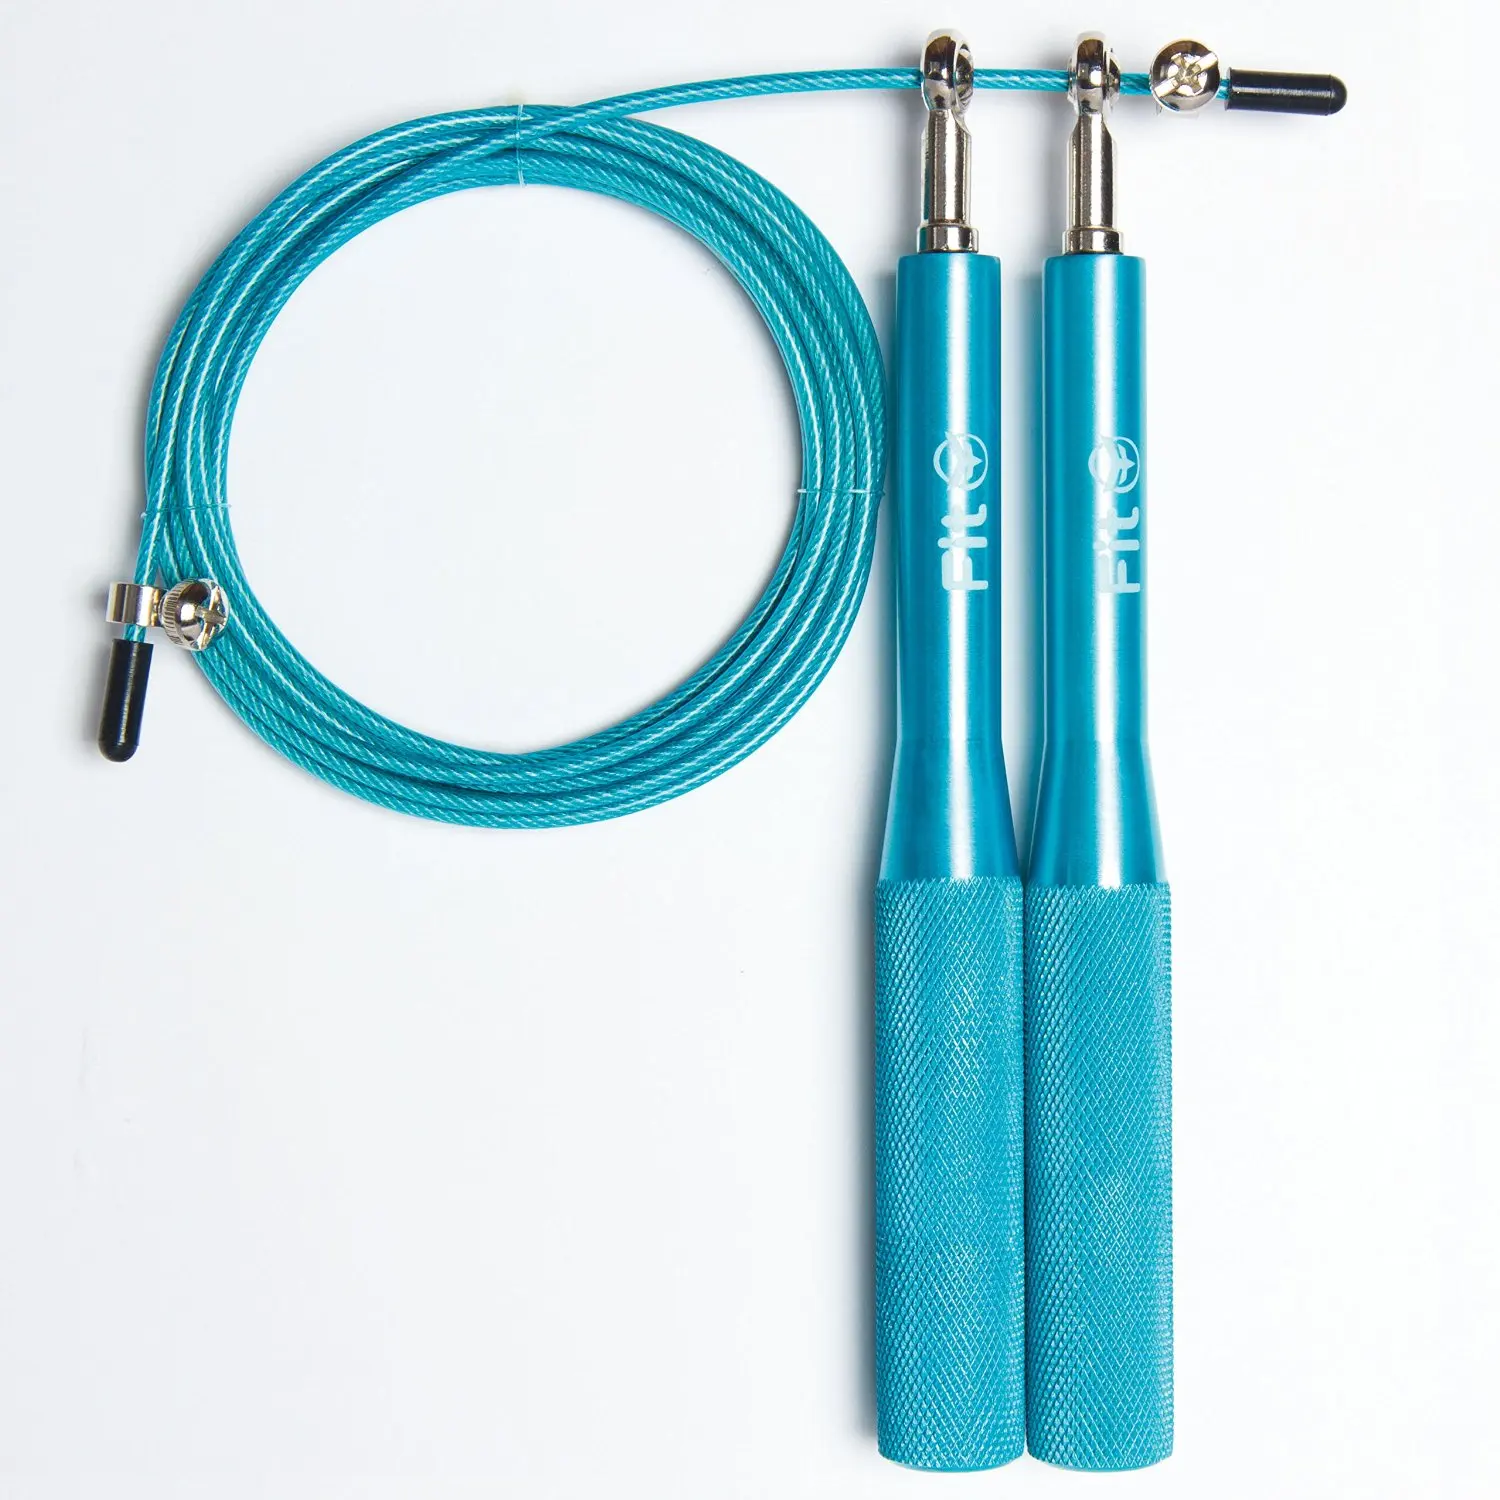 Meiyiu Students Aerobic Exercise Boxing Skipping Jump Rope Speed Fitness Rope